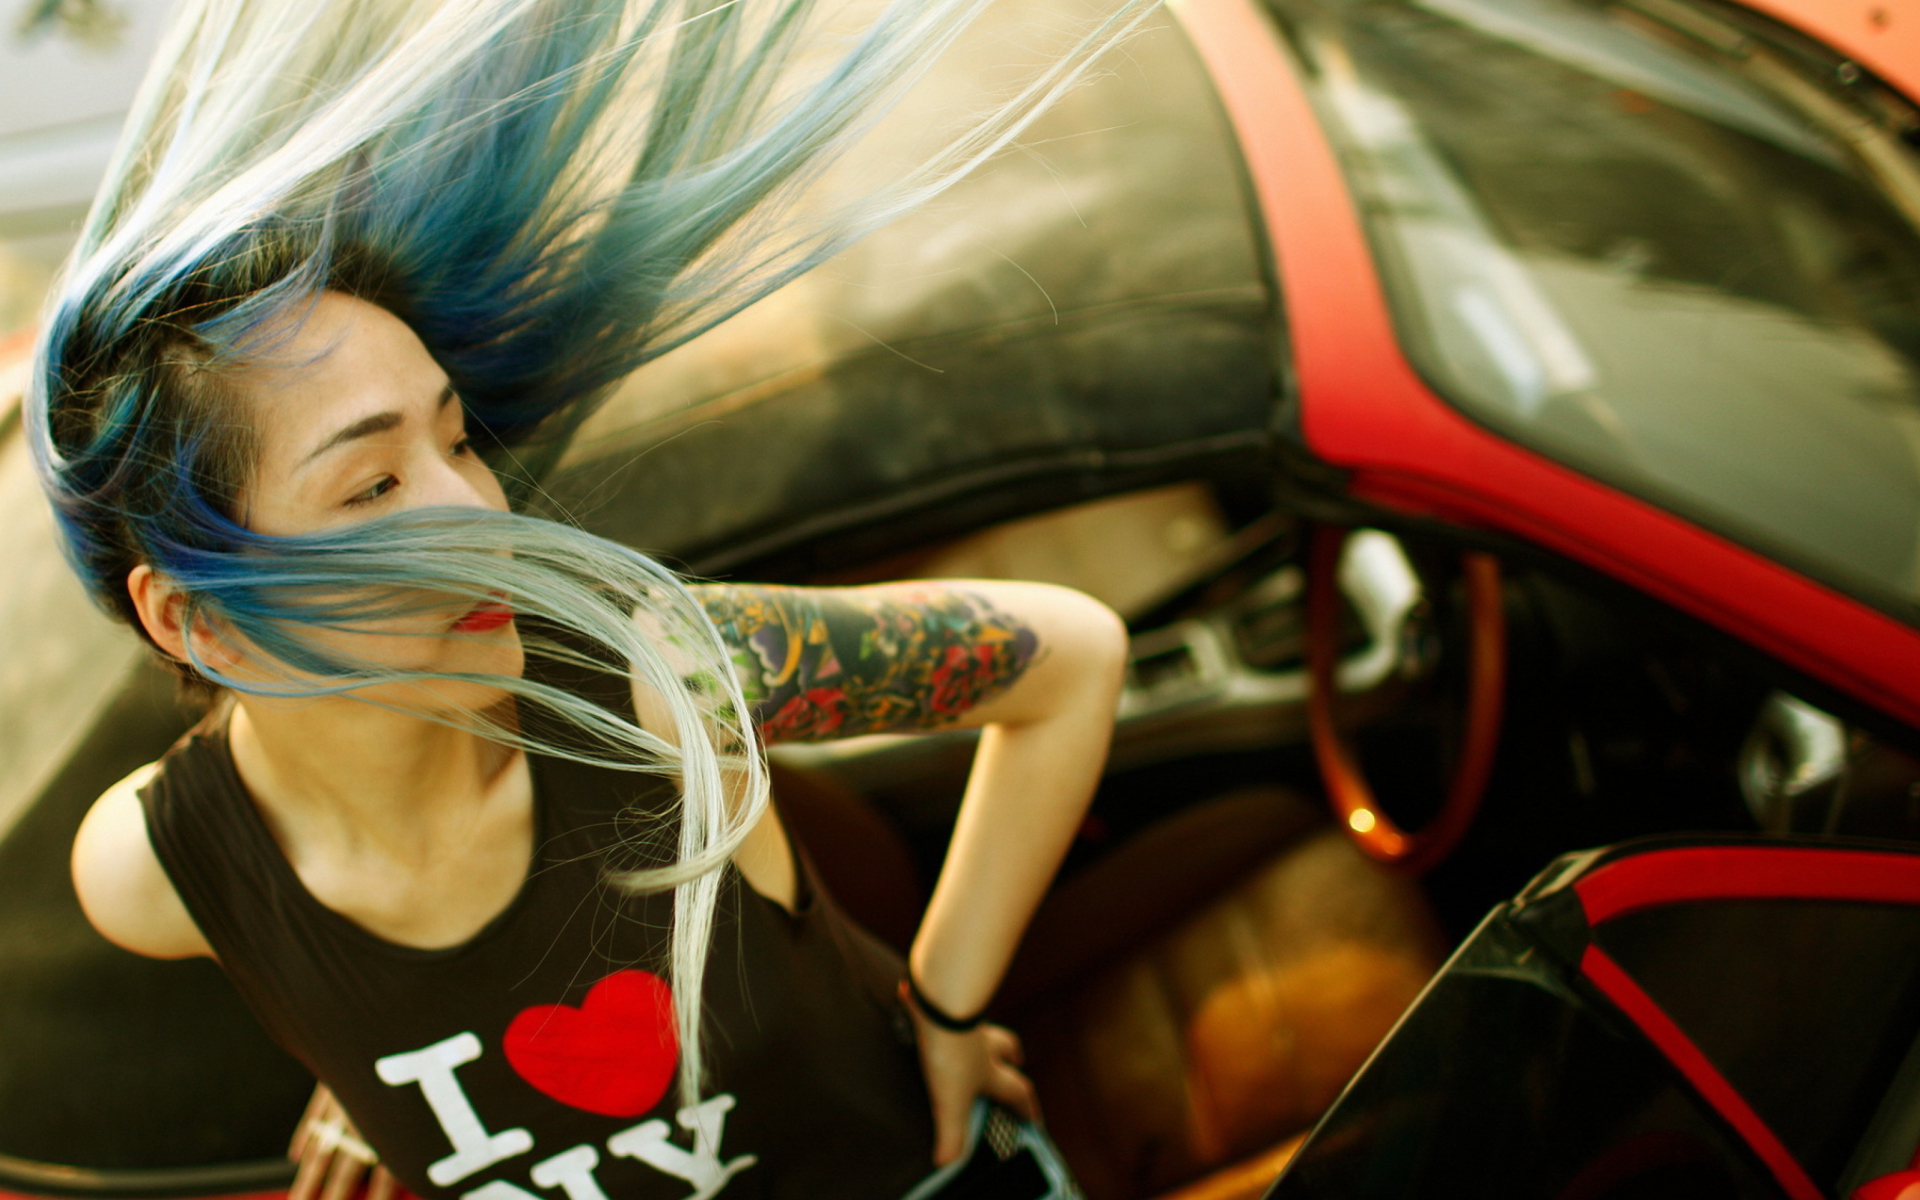 Cool Asian Girl With Blue Hair & I Love NY T-shirt wallpaper 1920x1200